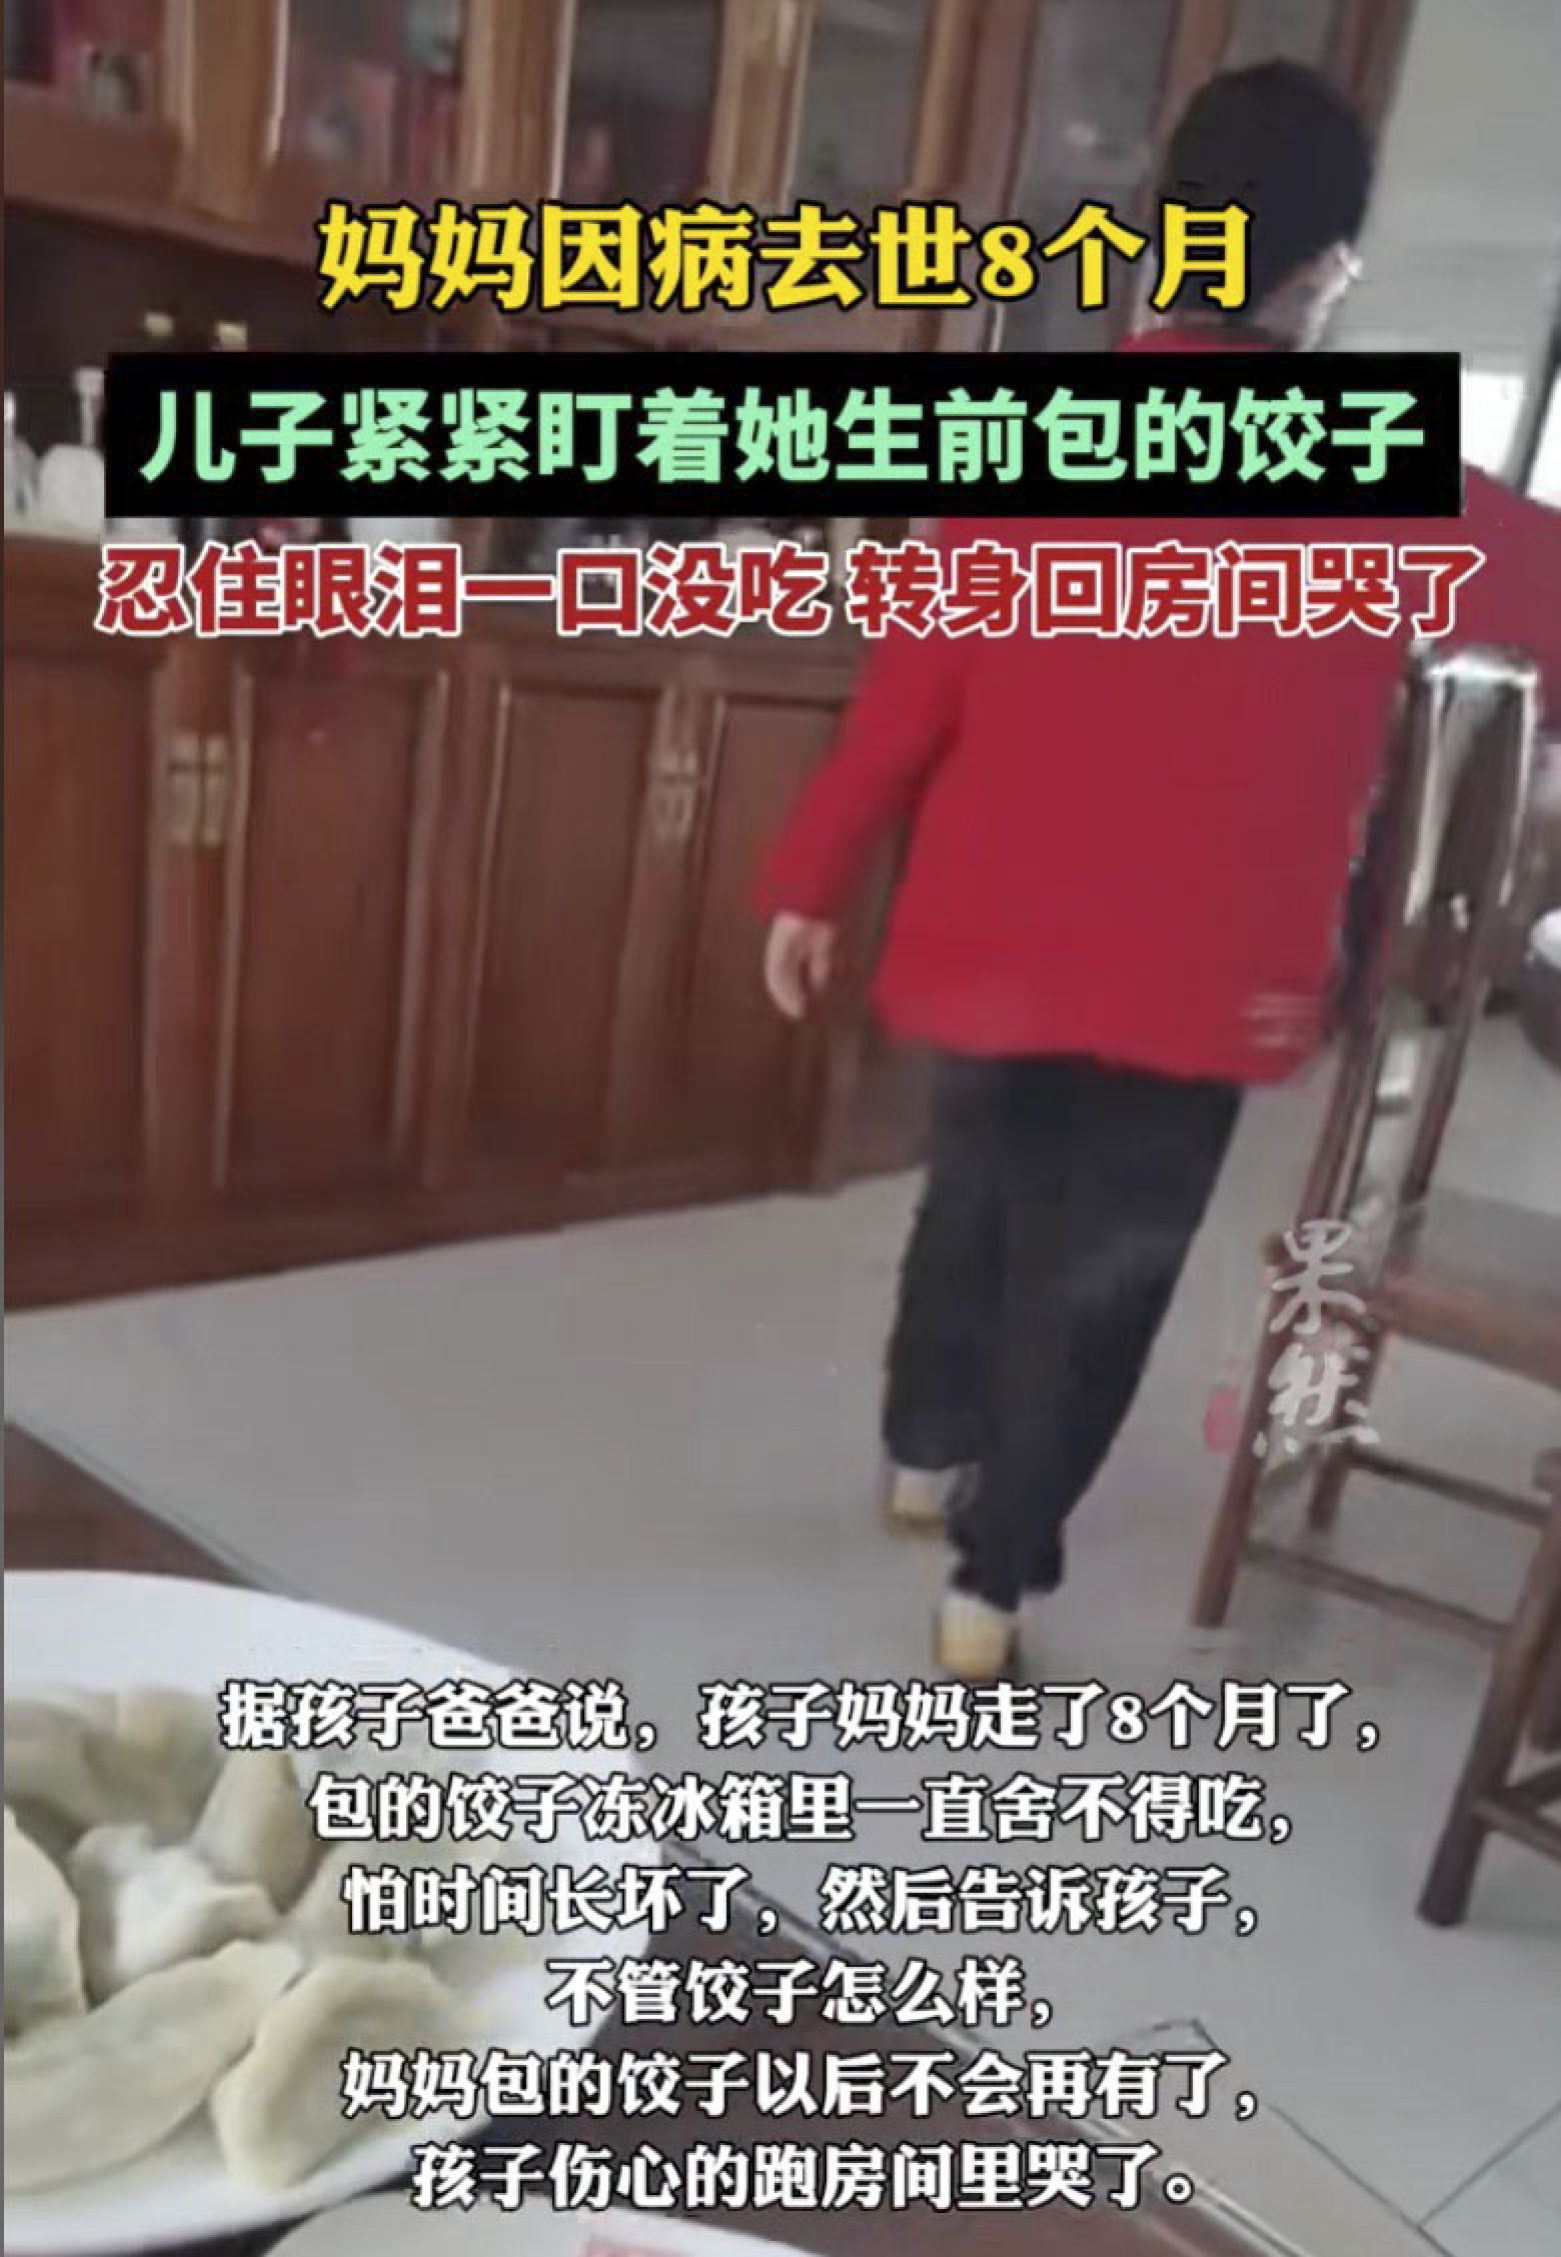 The video shows the boy staring at the dumplings and then running to his room in tears. Photo: Douyin